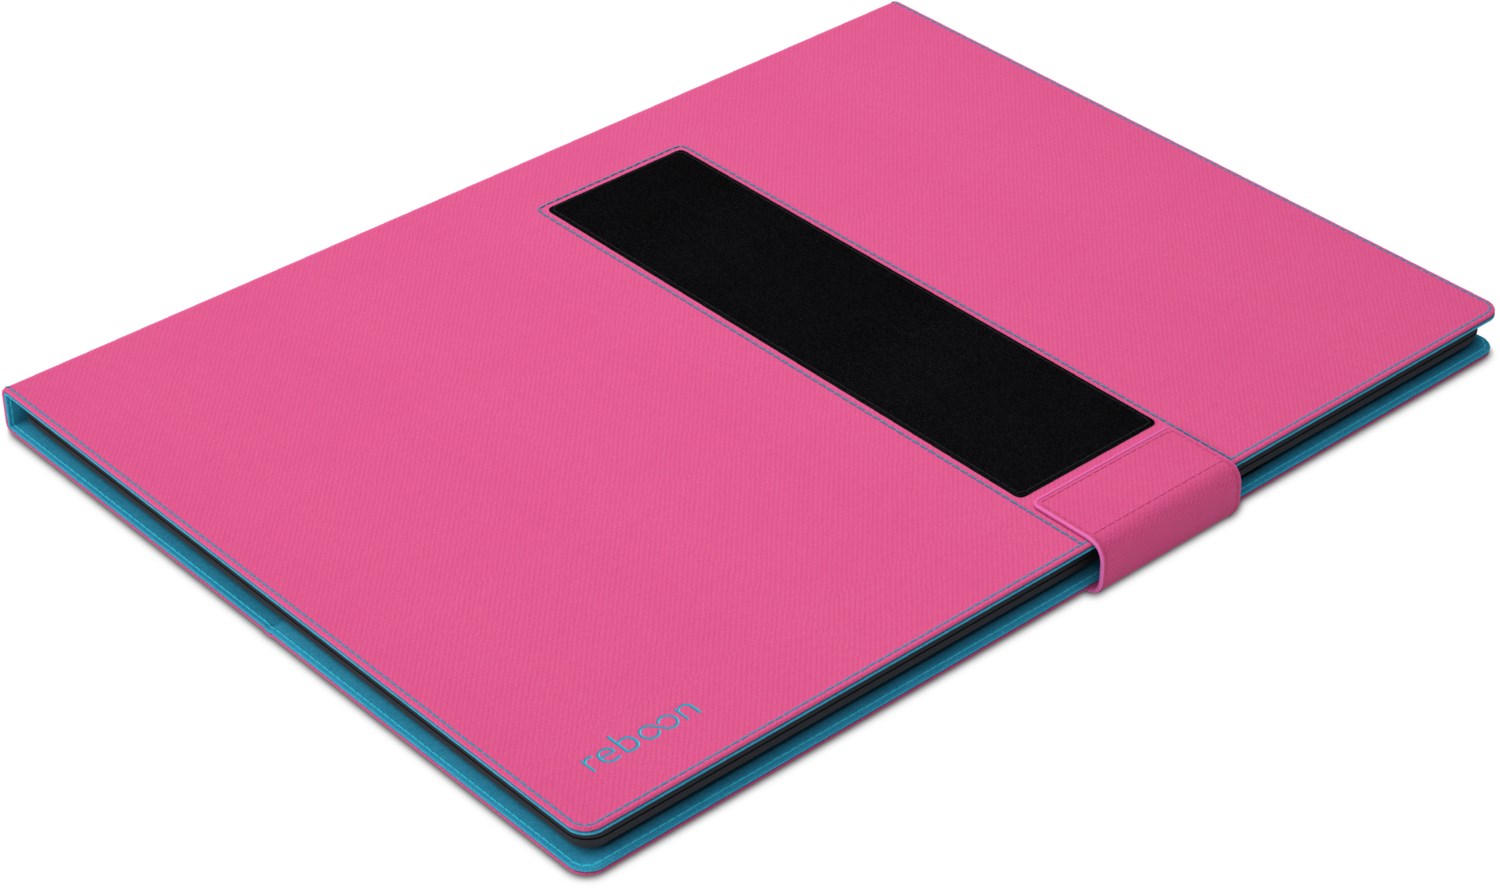 reboon booncover m tablethÃ¼lle pink